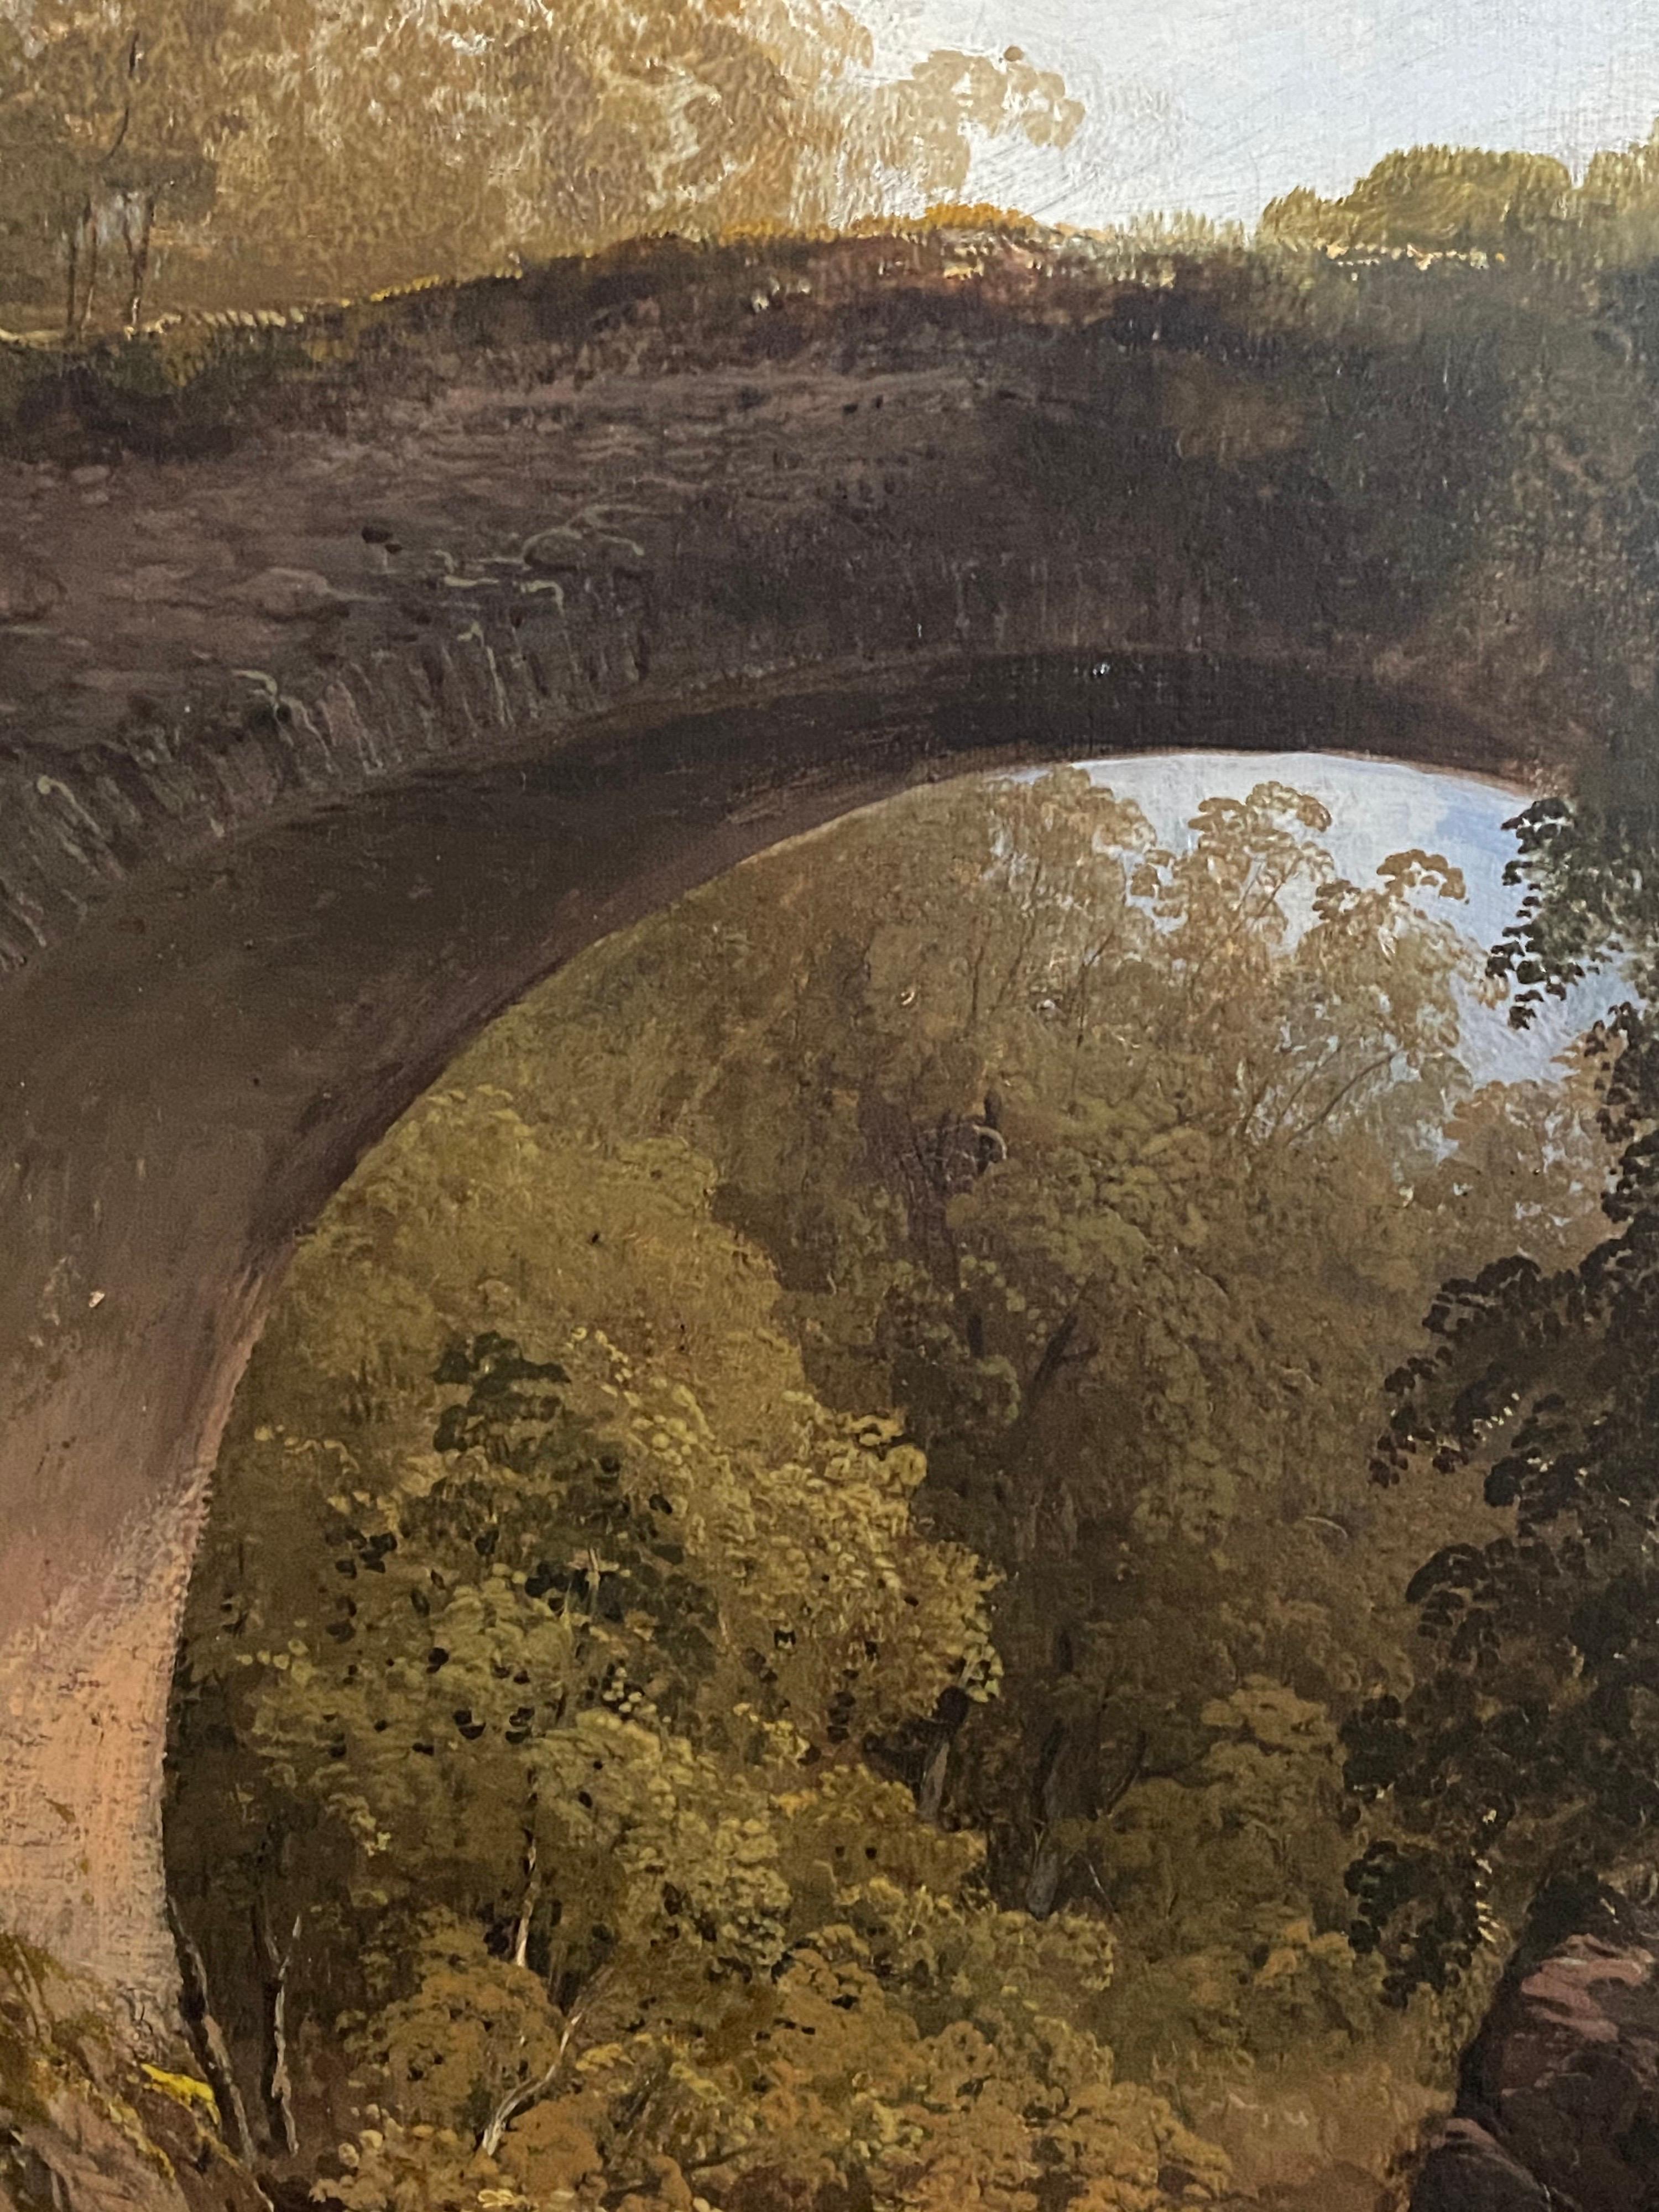 19th century Scottish wooded landscape with stone bridge over a flowing river - Victorian Painting by Frances Stoddart